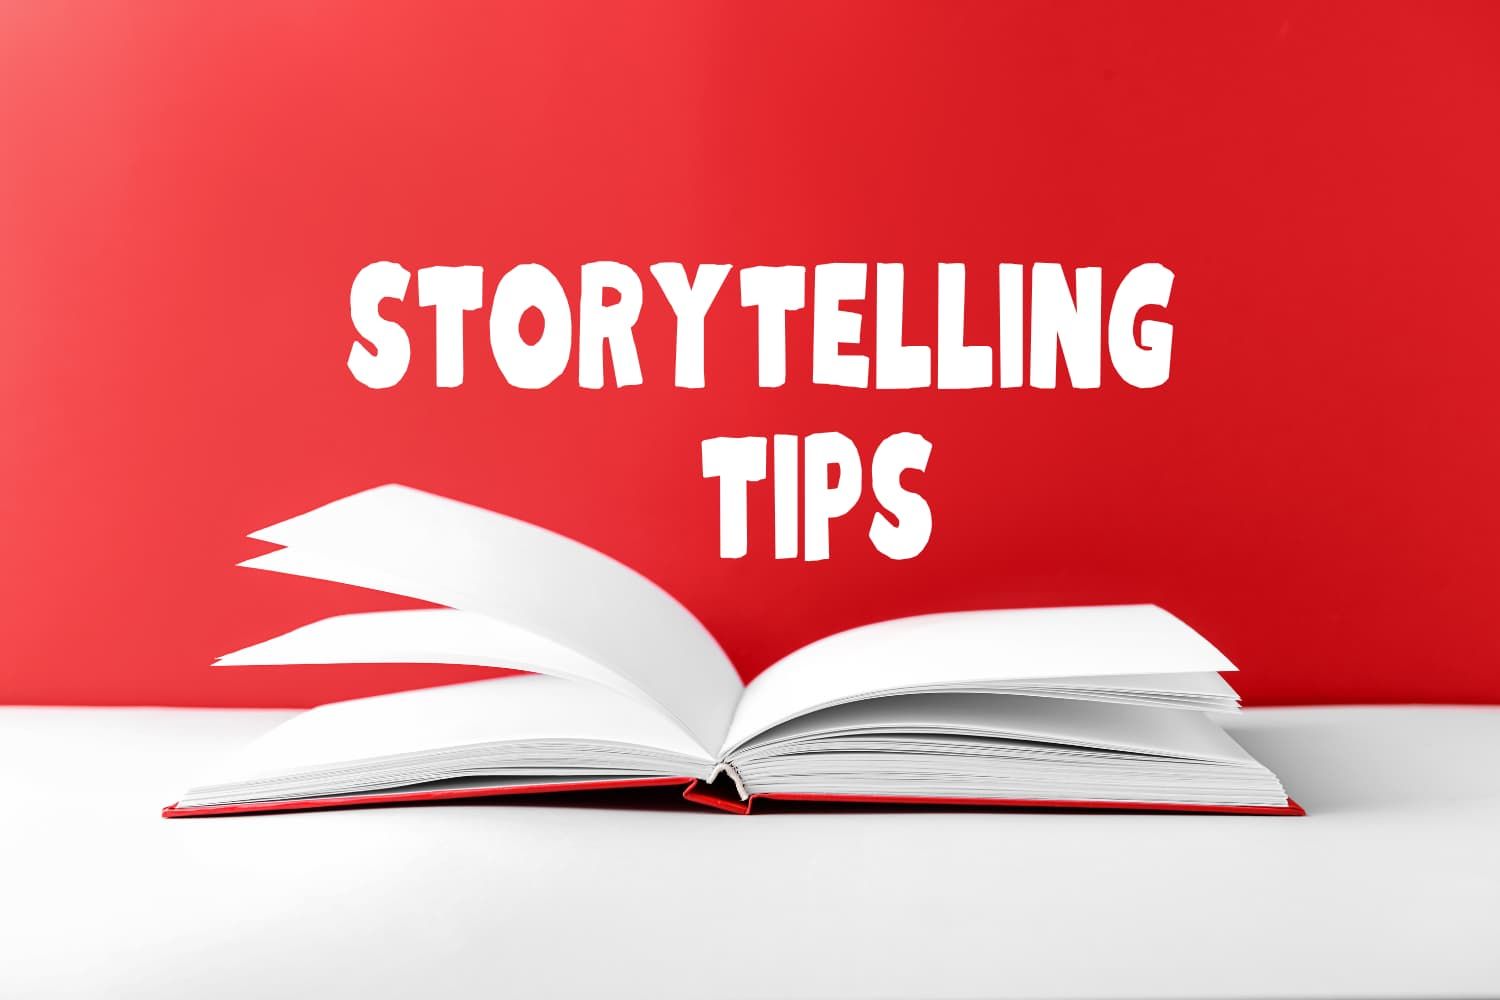 Storytelling%20tips%20-%20NT%20The%20pharisee%20and%20the%20tax%20collector%20-%20Teaching%20the%20parable%20of%20the%20tax%20collector%20and%20pharisee-bb2ec4e5 Jesus - His teaching